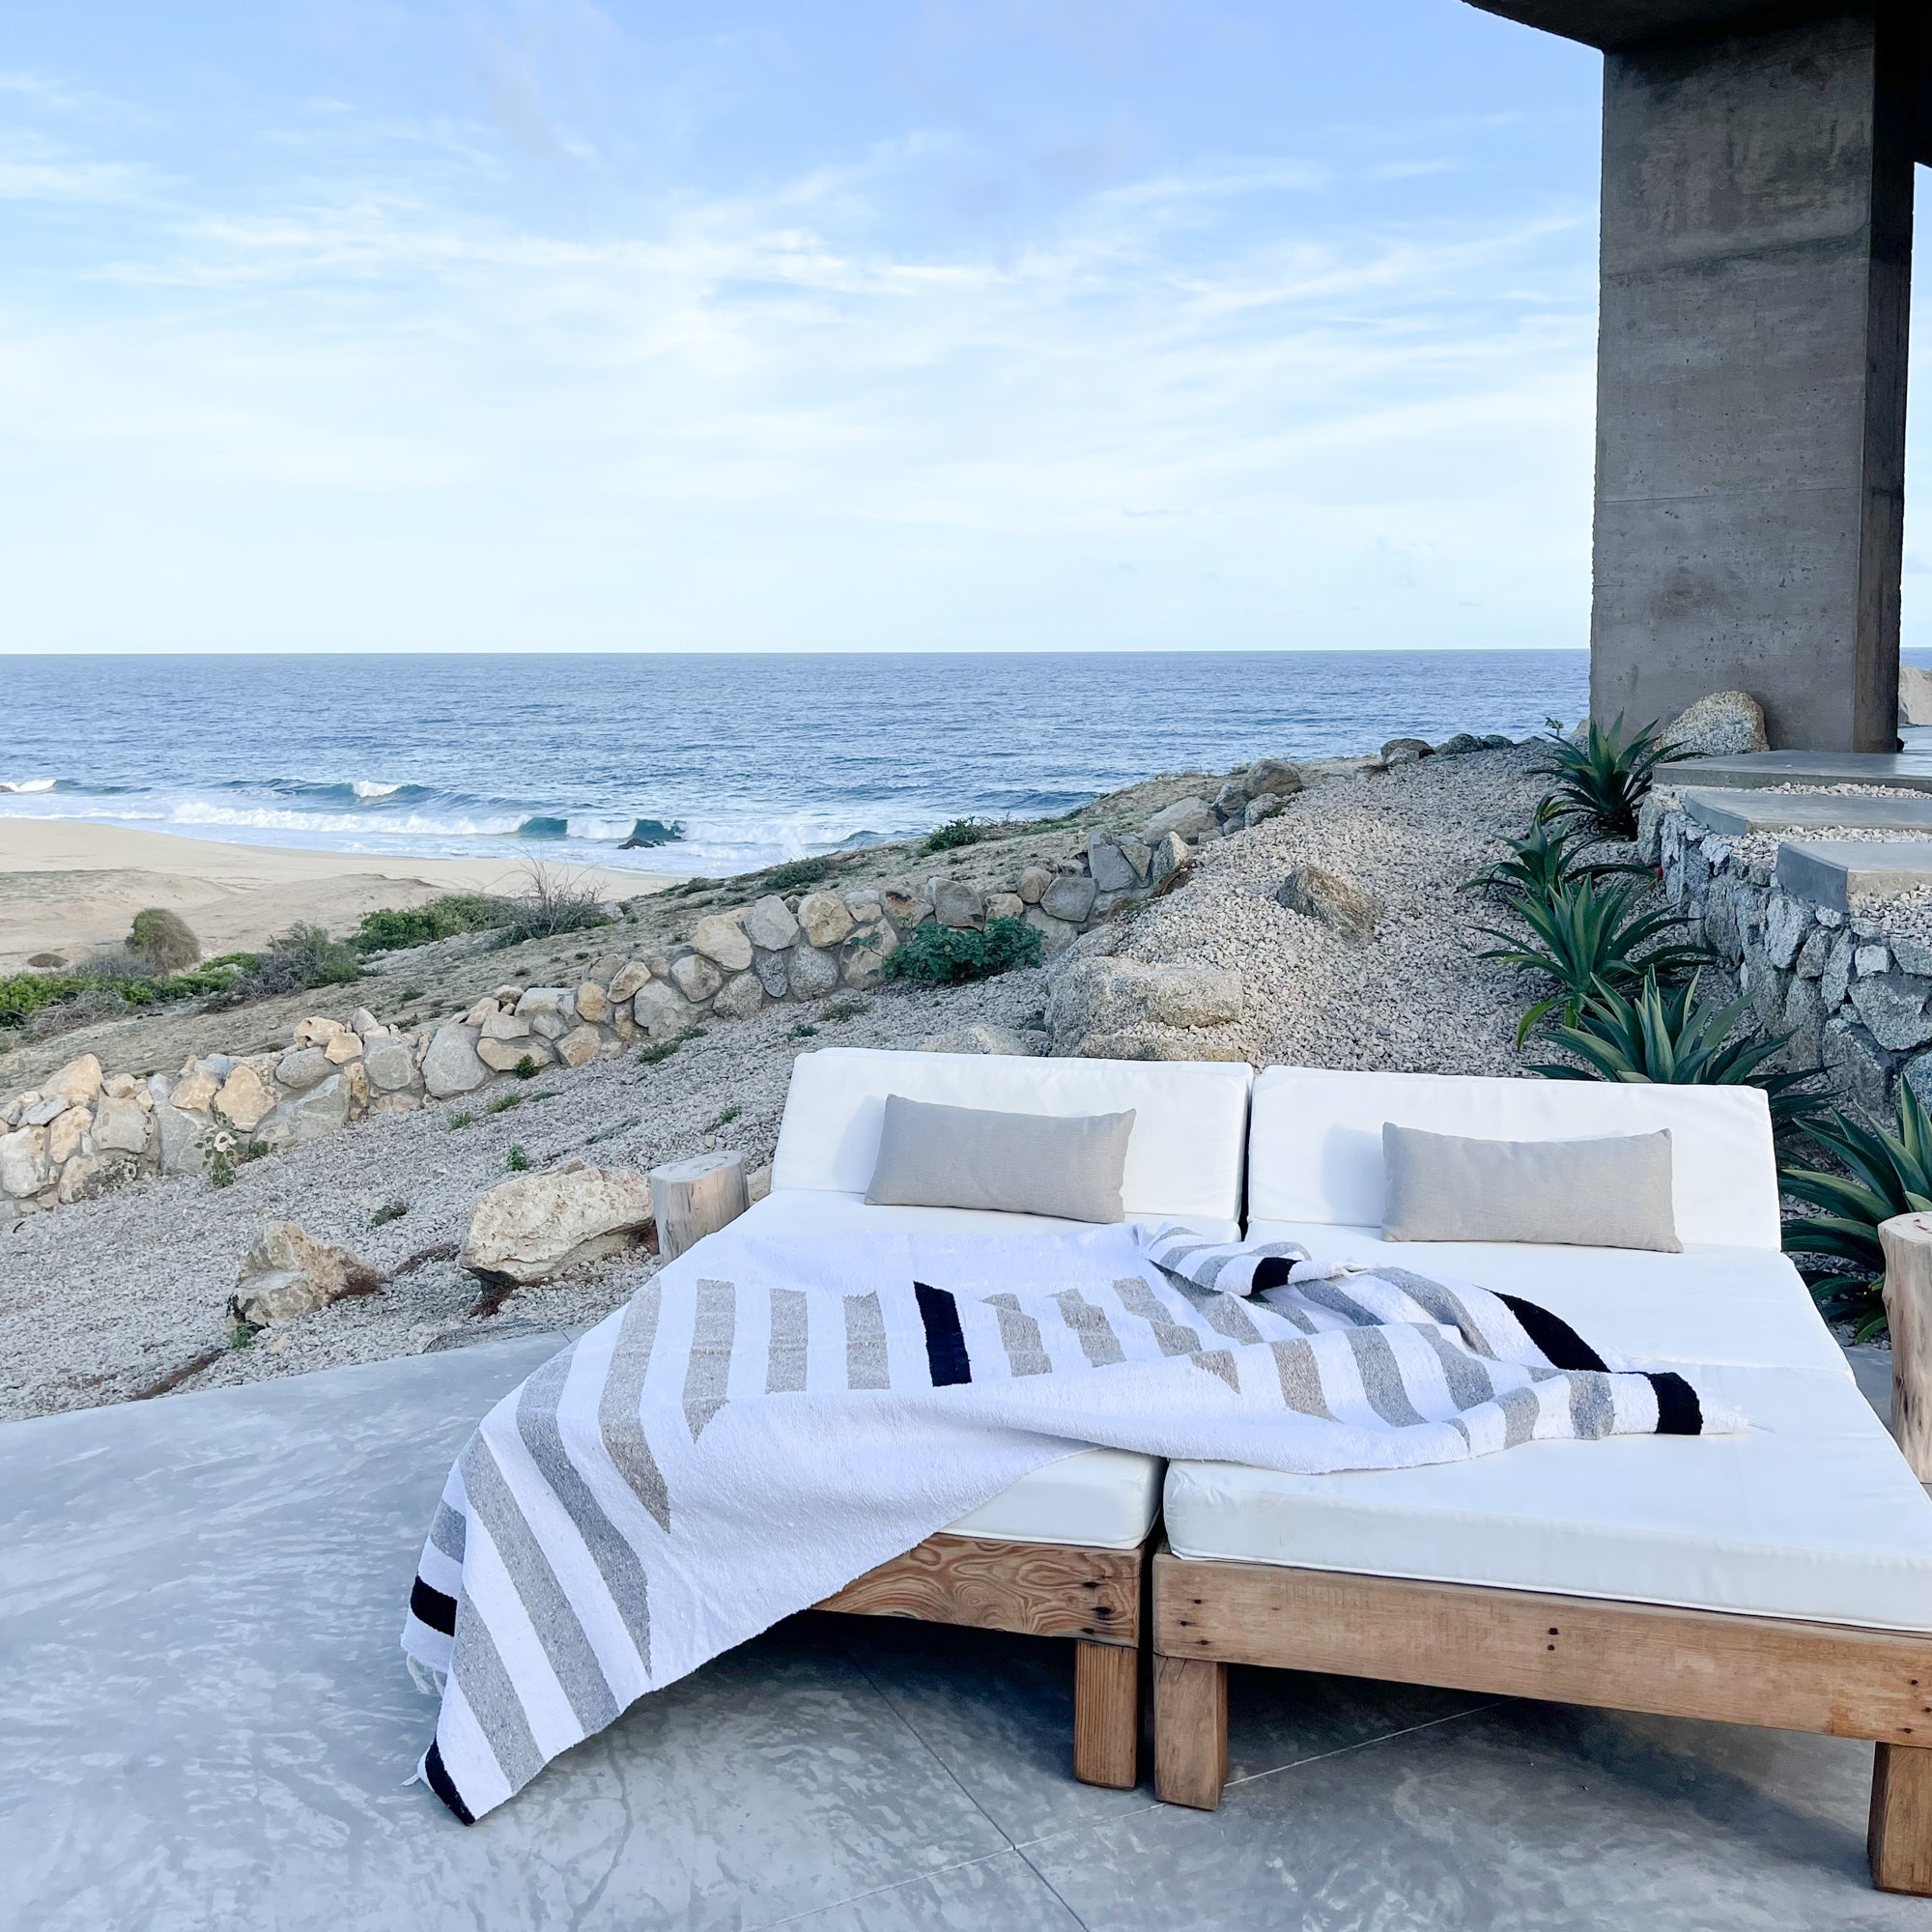 A San Borja Mexican blanket on lounge chairs overlooking the Pacific ocean in Baja, Mexico.